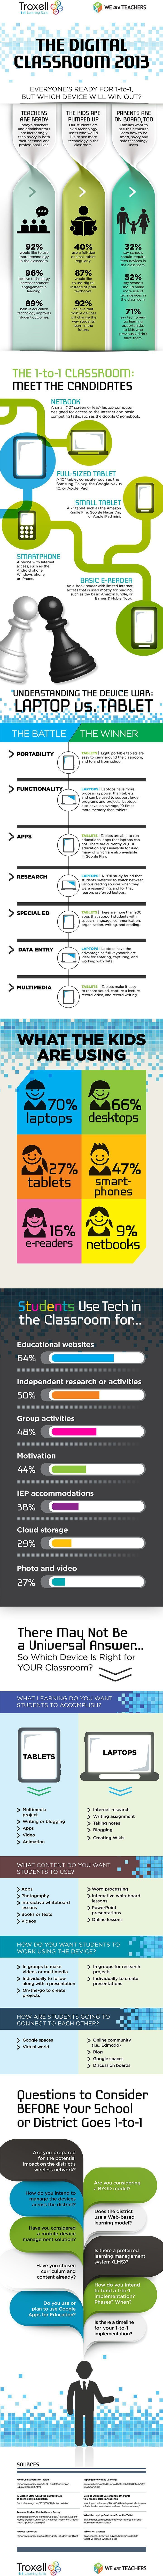 The Digital Classroom 2013 Infographic